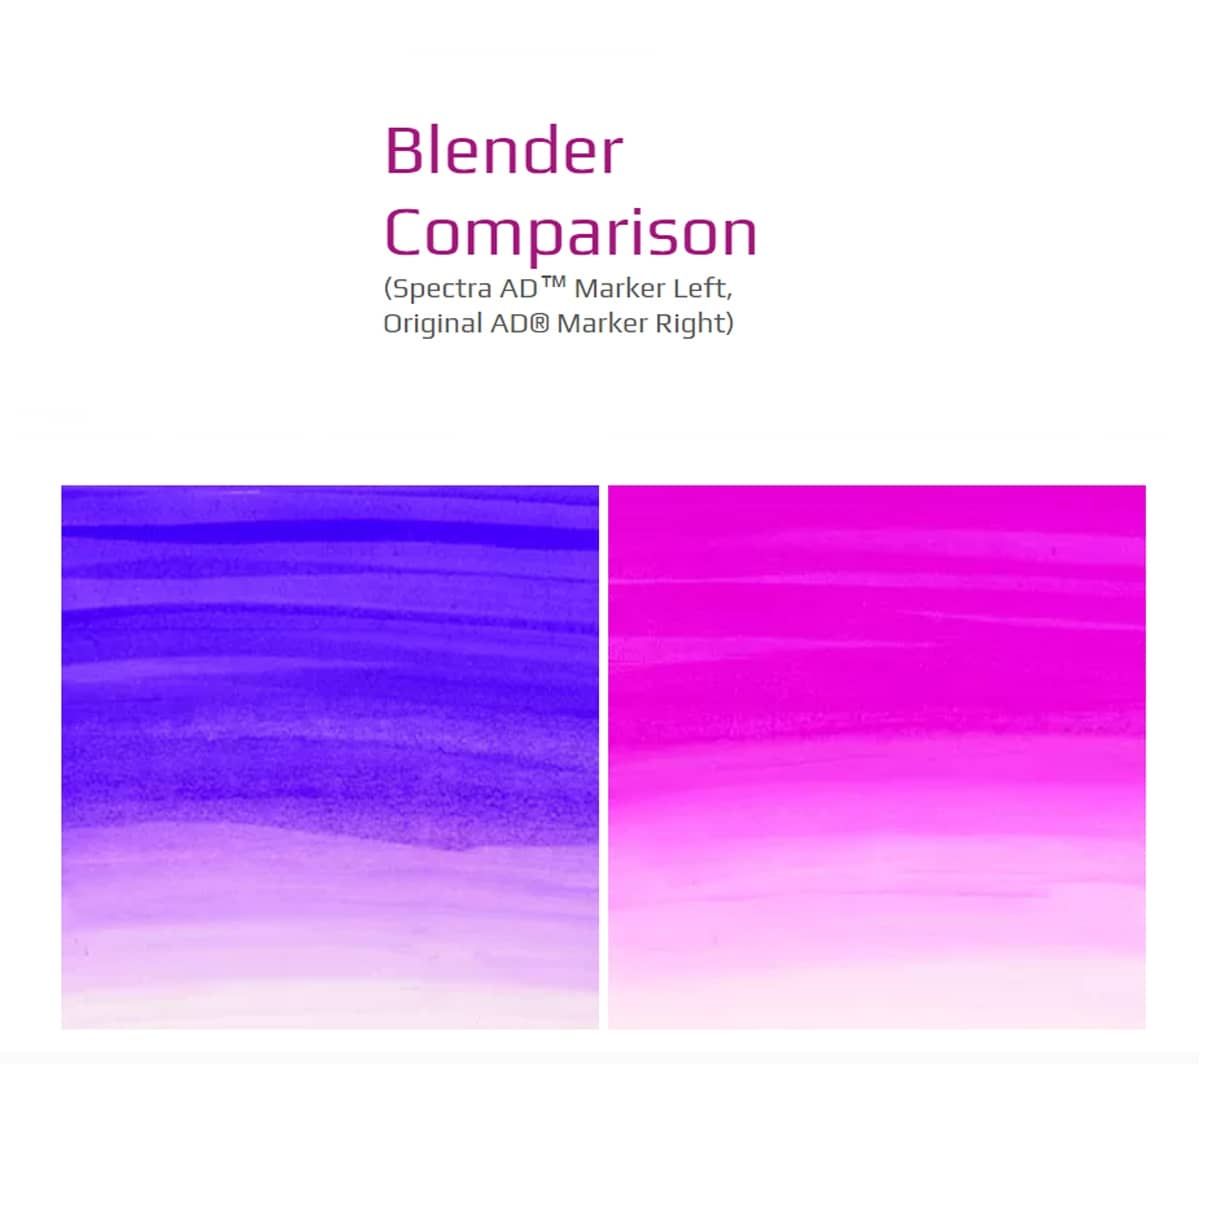 Blender Comparison - Spectra AD and AD Markers